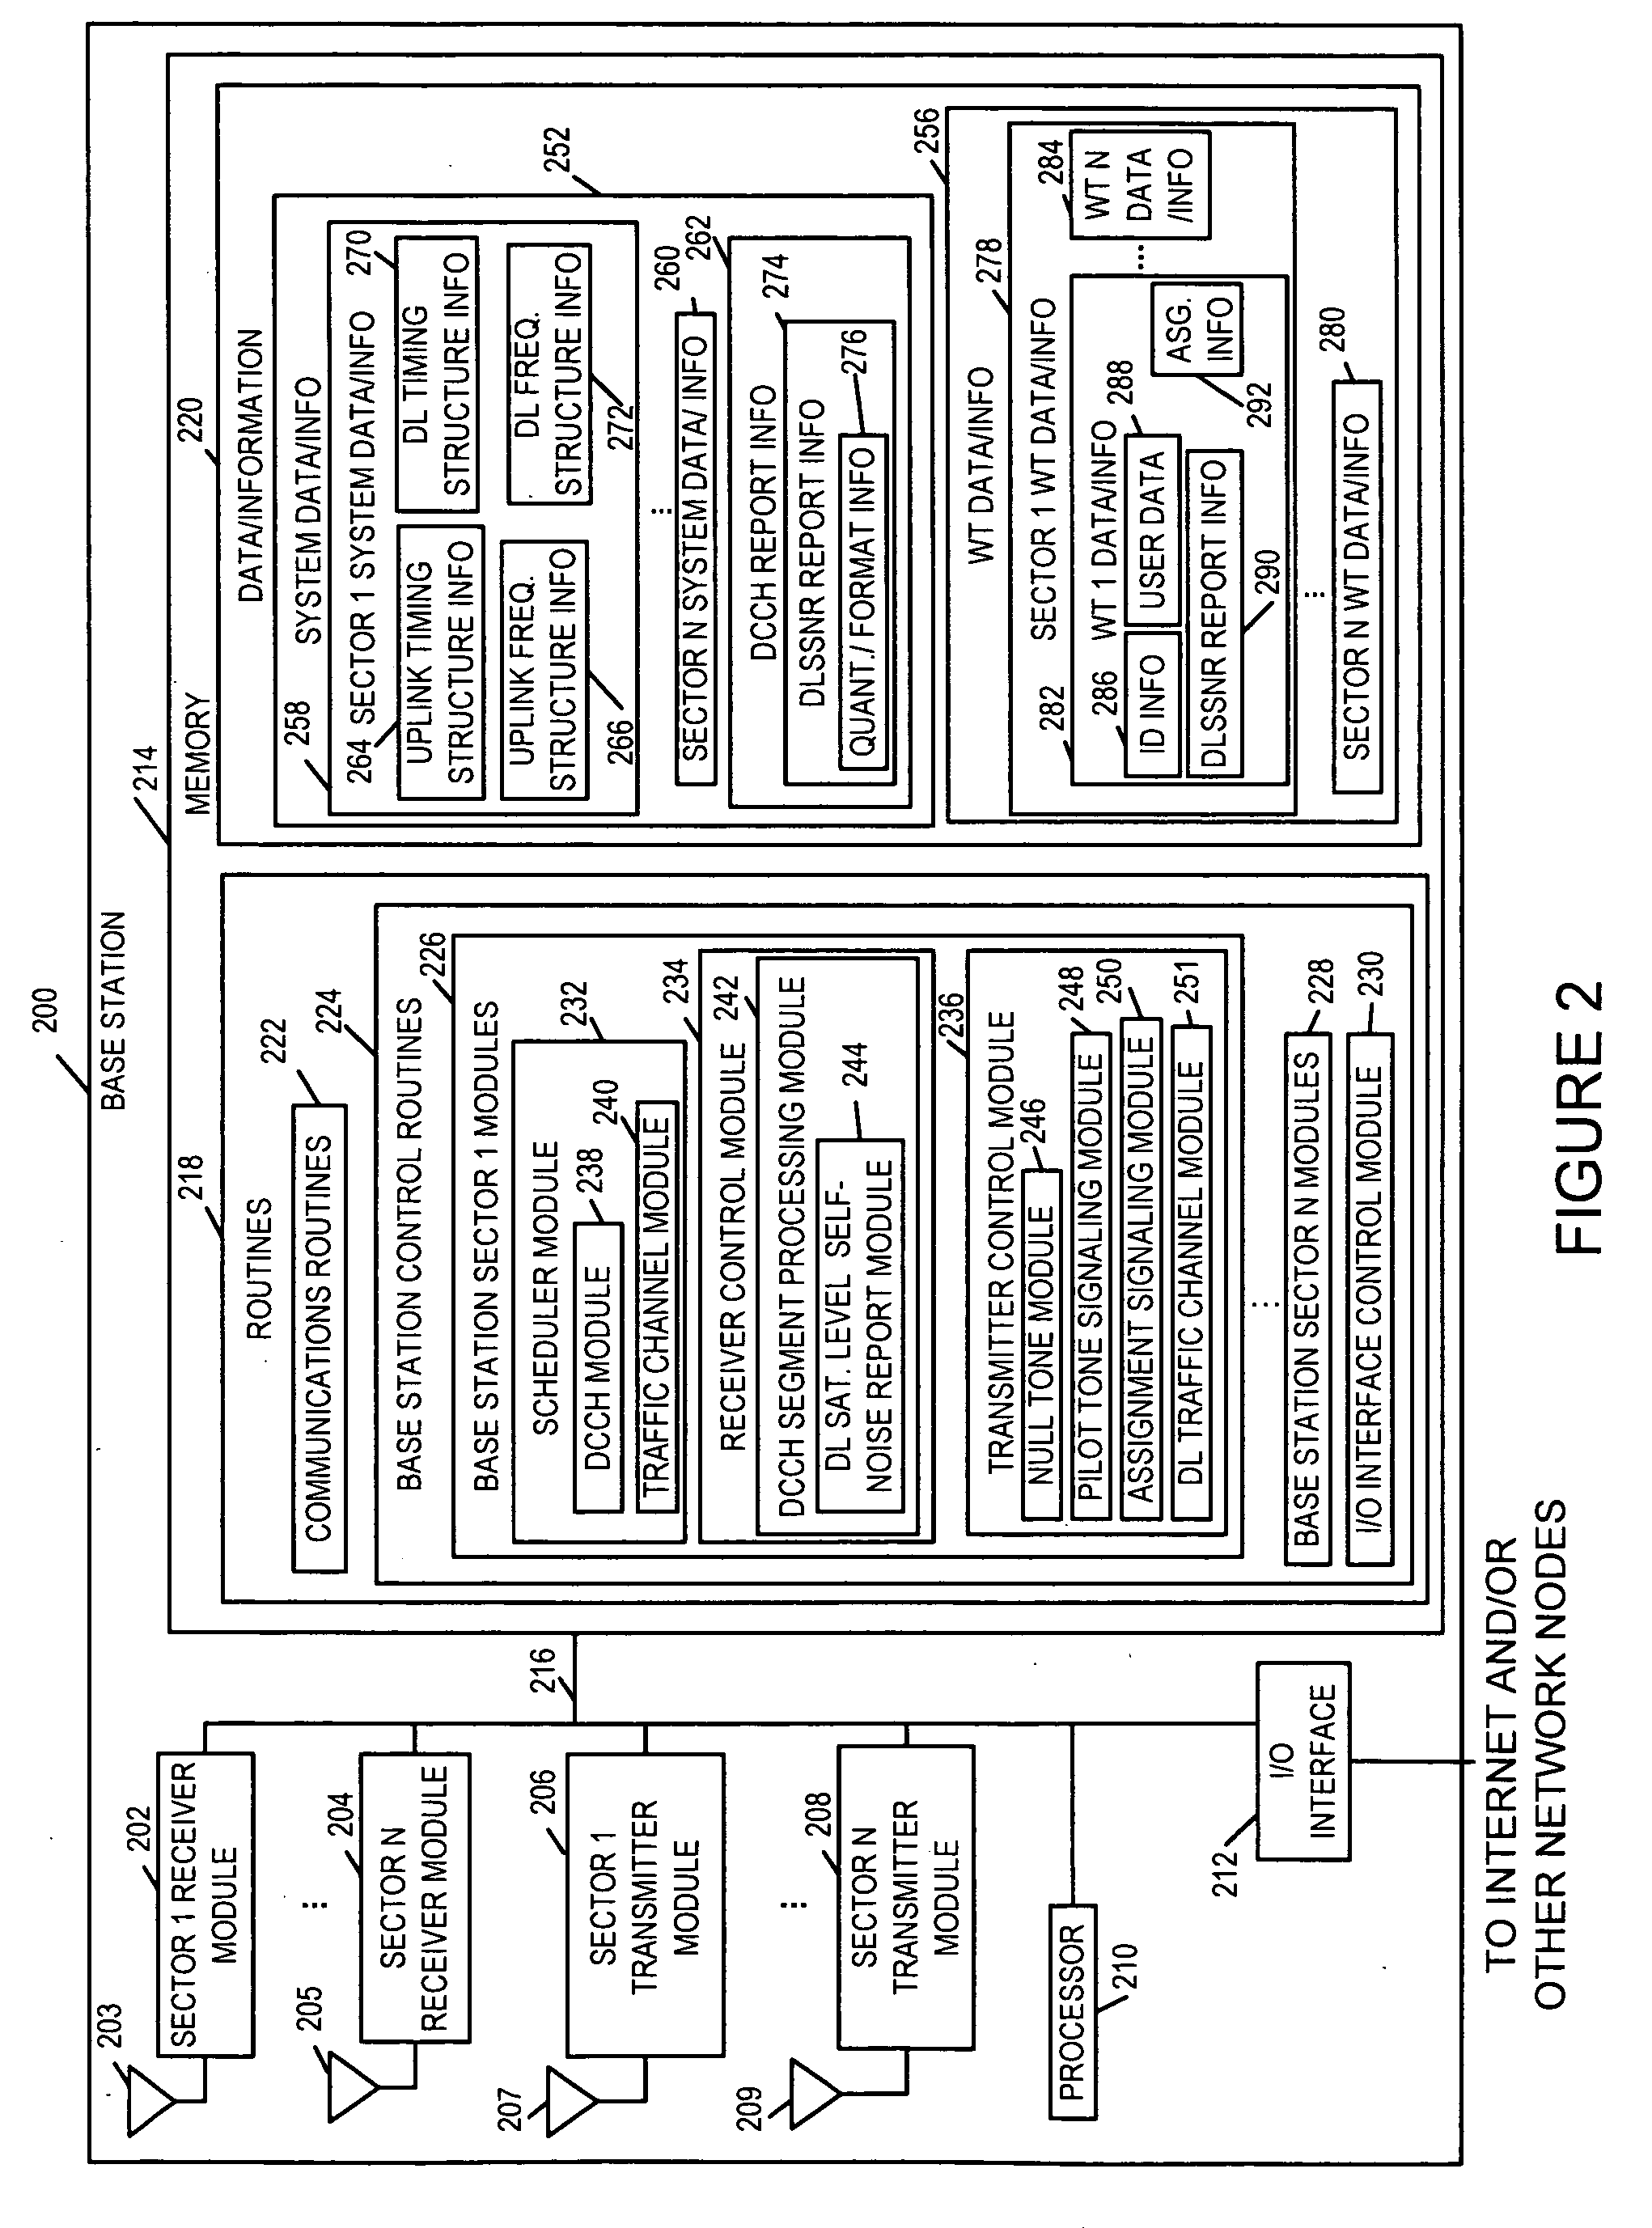 Methods and apparatus for generating, communicating, and/or using information relating to self-noise